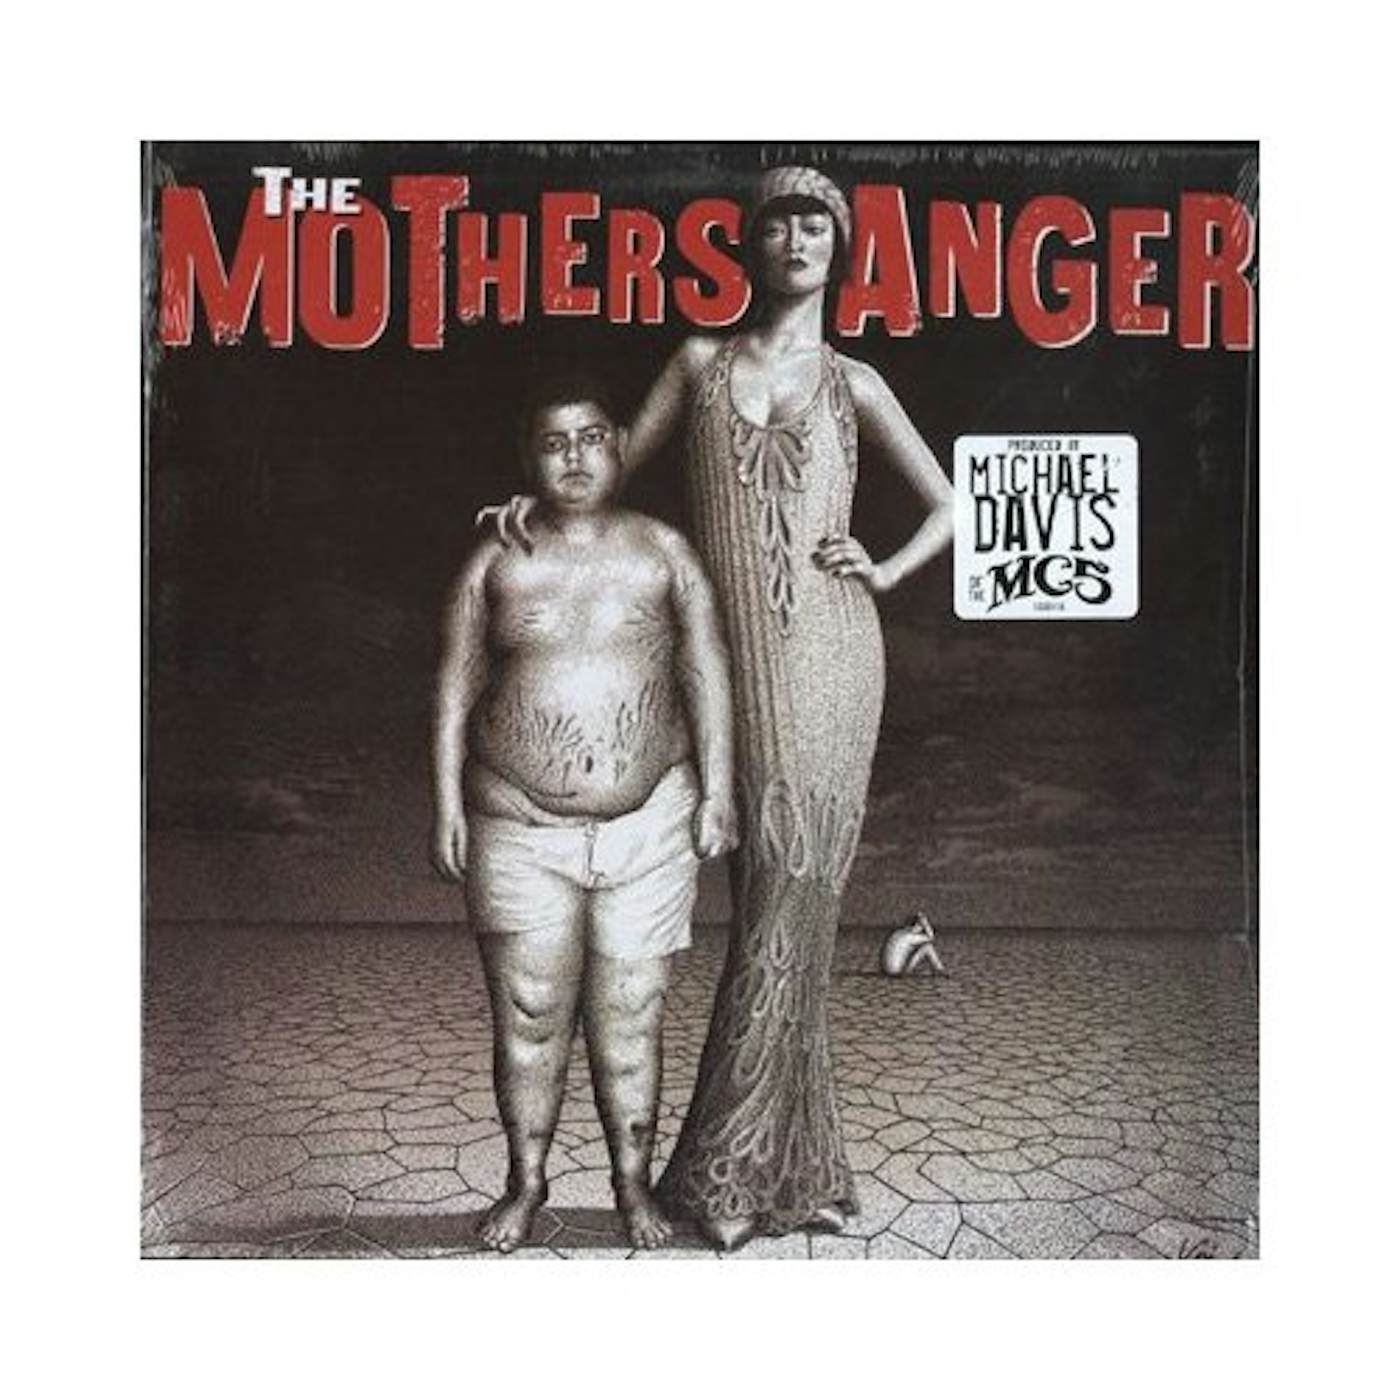 MOTHERS ANGER Vinyl Record